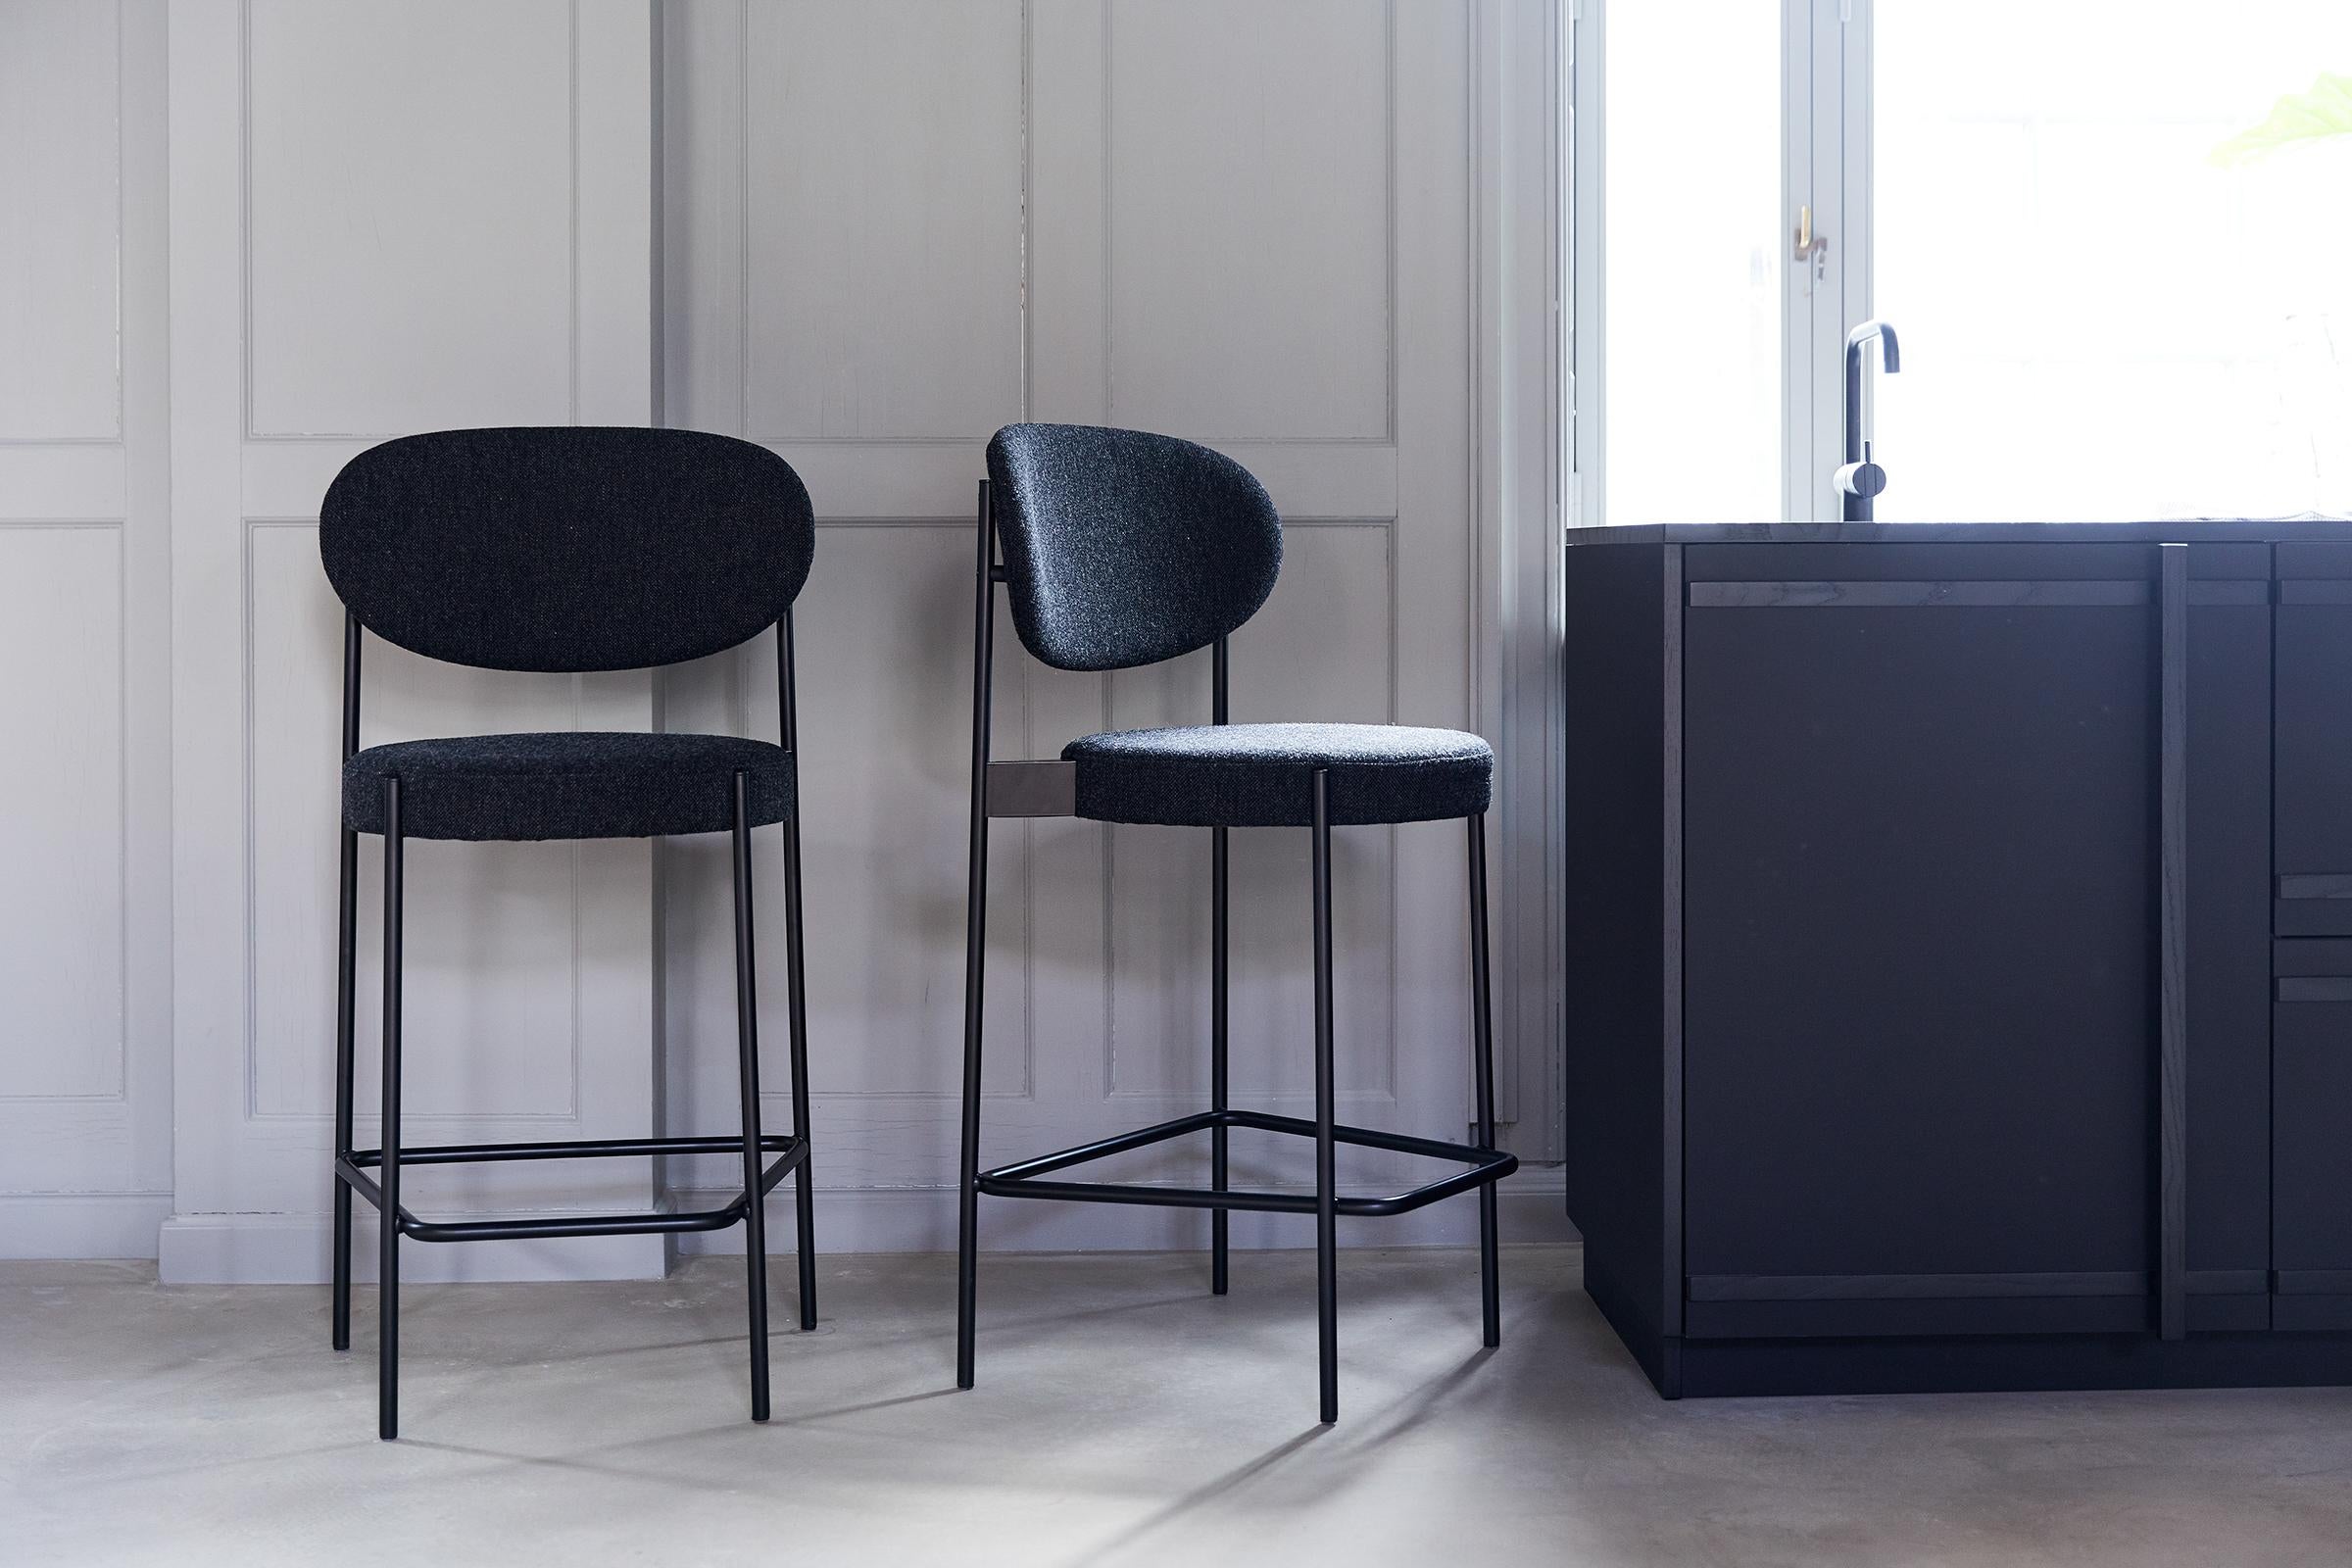 Fully upholstered stacking chair with black painted metal frame and felt feet.
It is the Nanna Ditzel designed fabric, Hallingdal from Kvadrat, color code 180.

CAL117 compliant foam can be made by request. Extra production time will be 5-6 weeks.